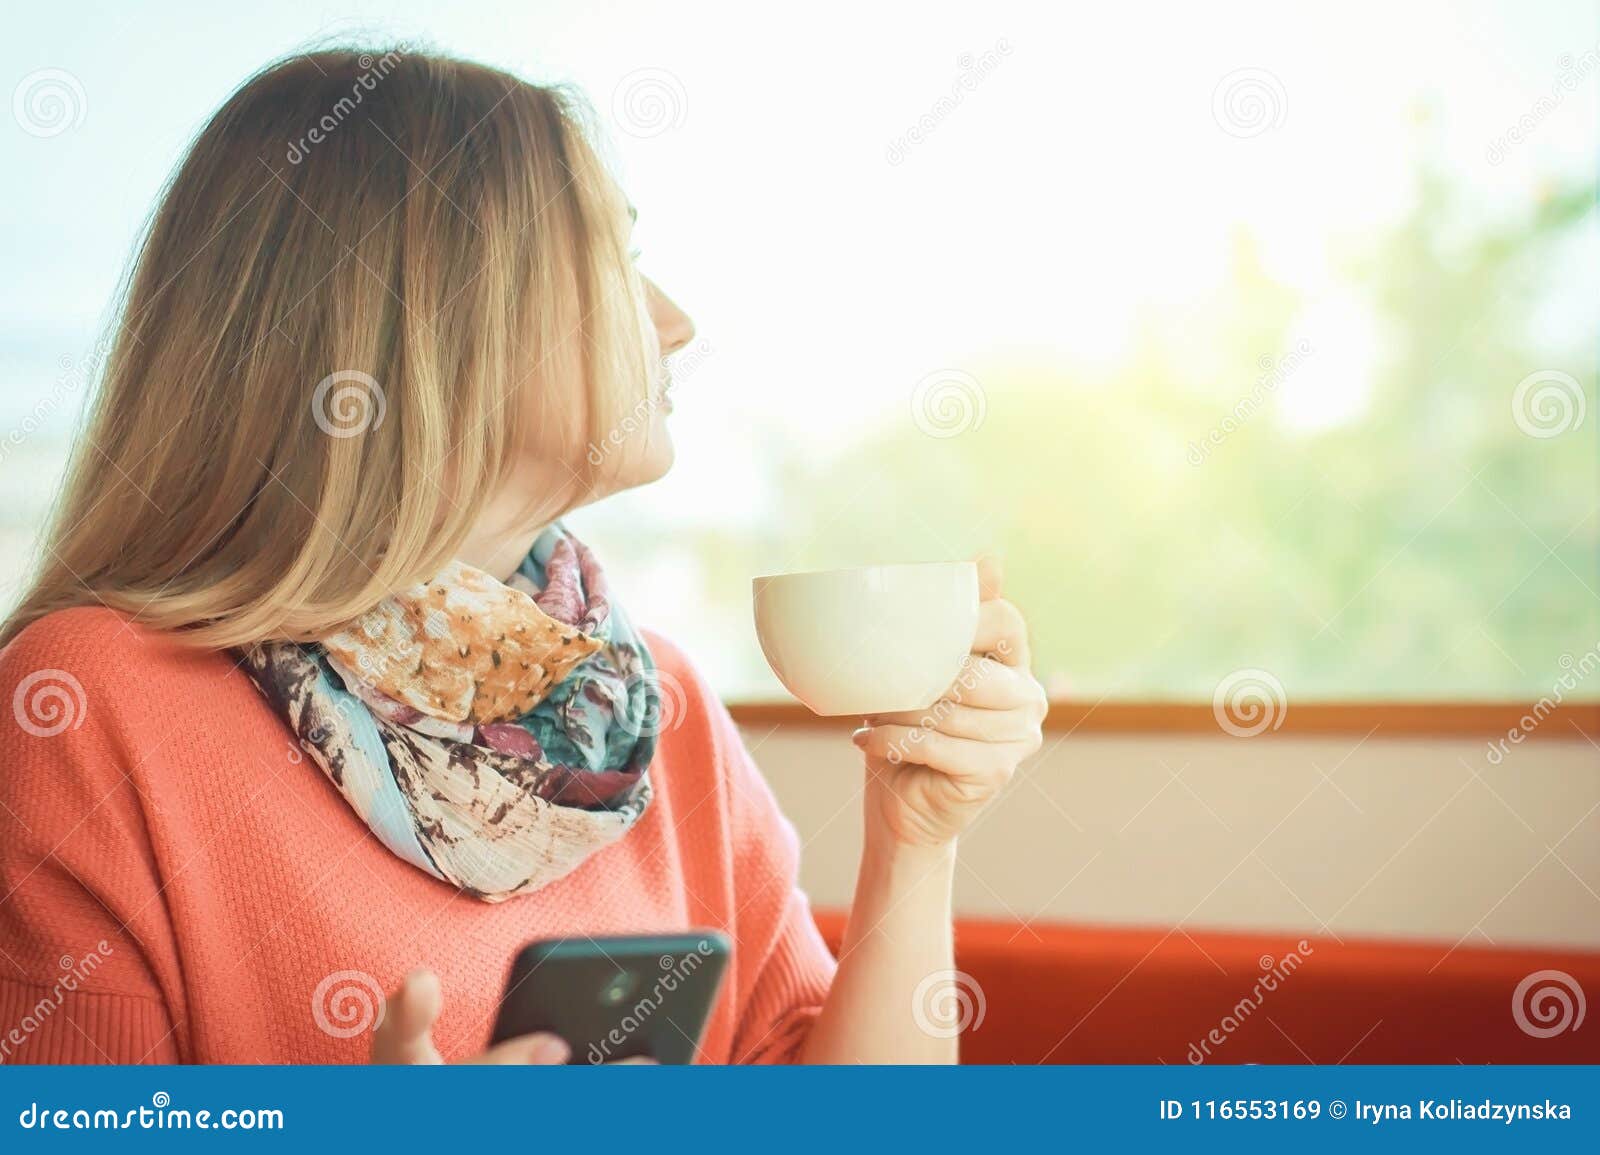 Thoughtfully In A Cafe With A Cup Of Coffee Stock Image | CartoonDealer ...
